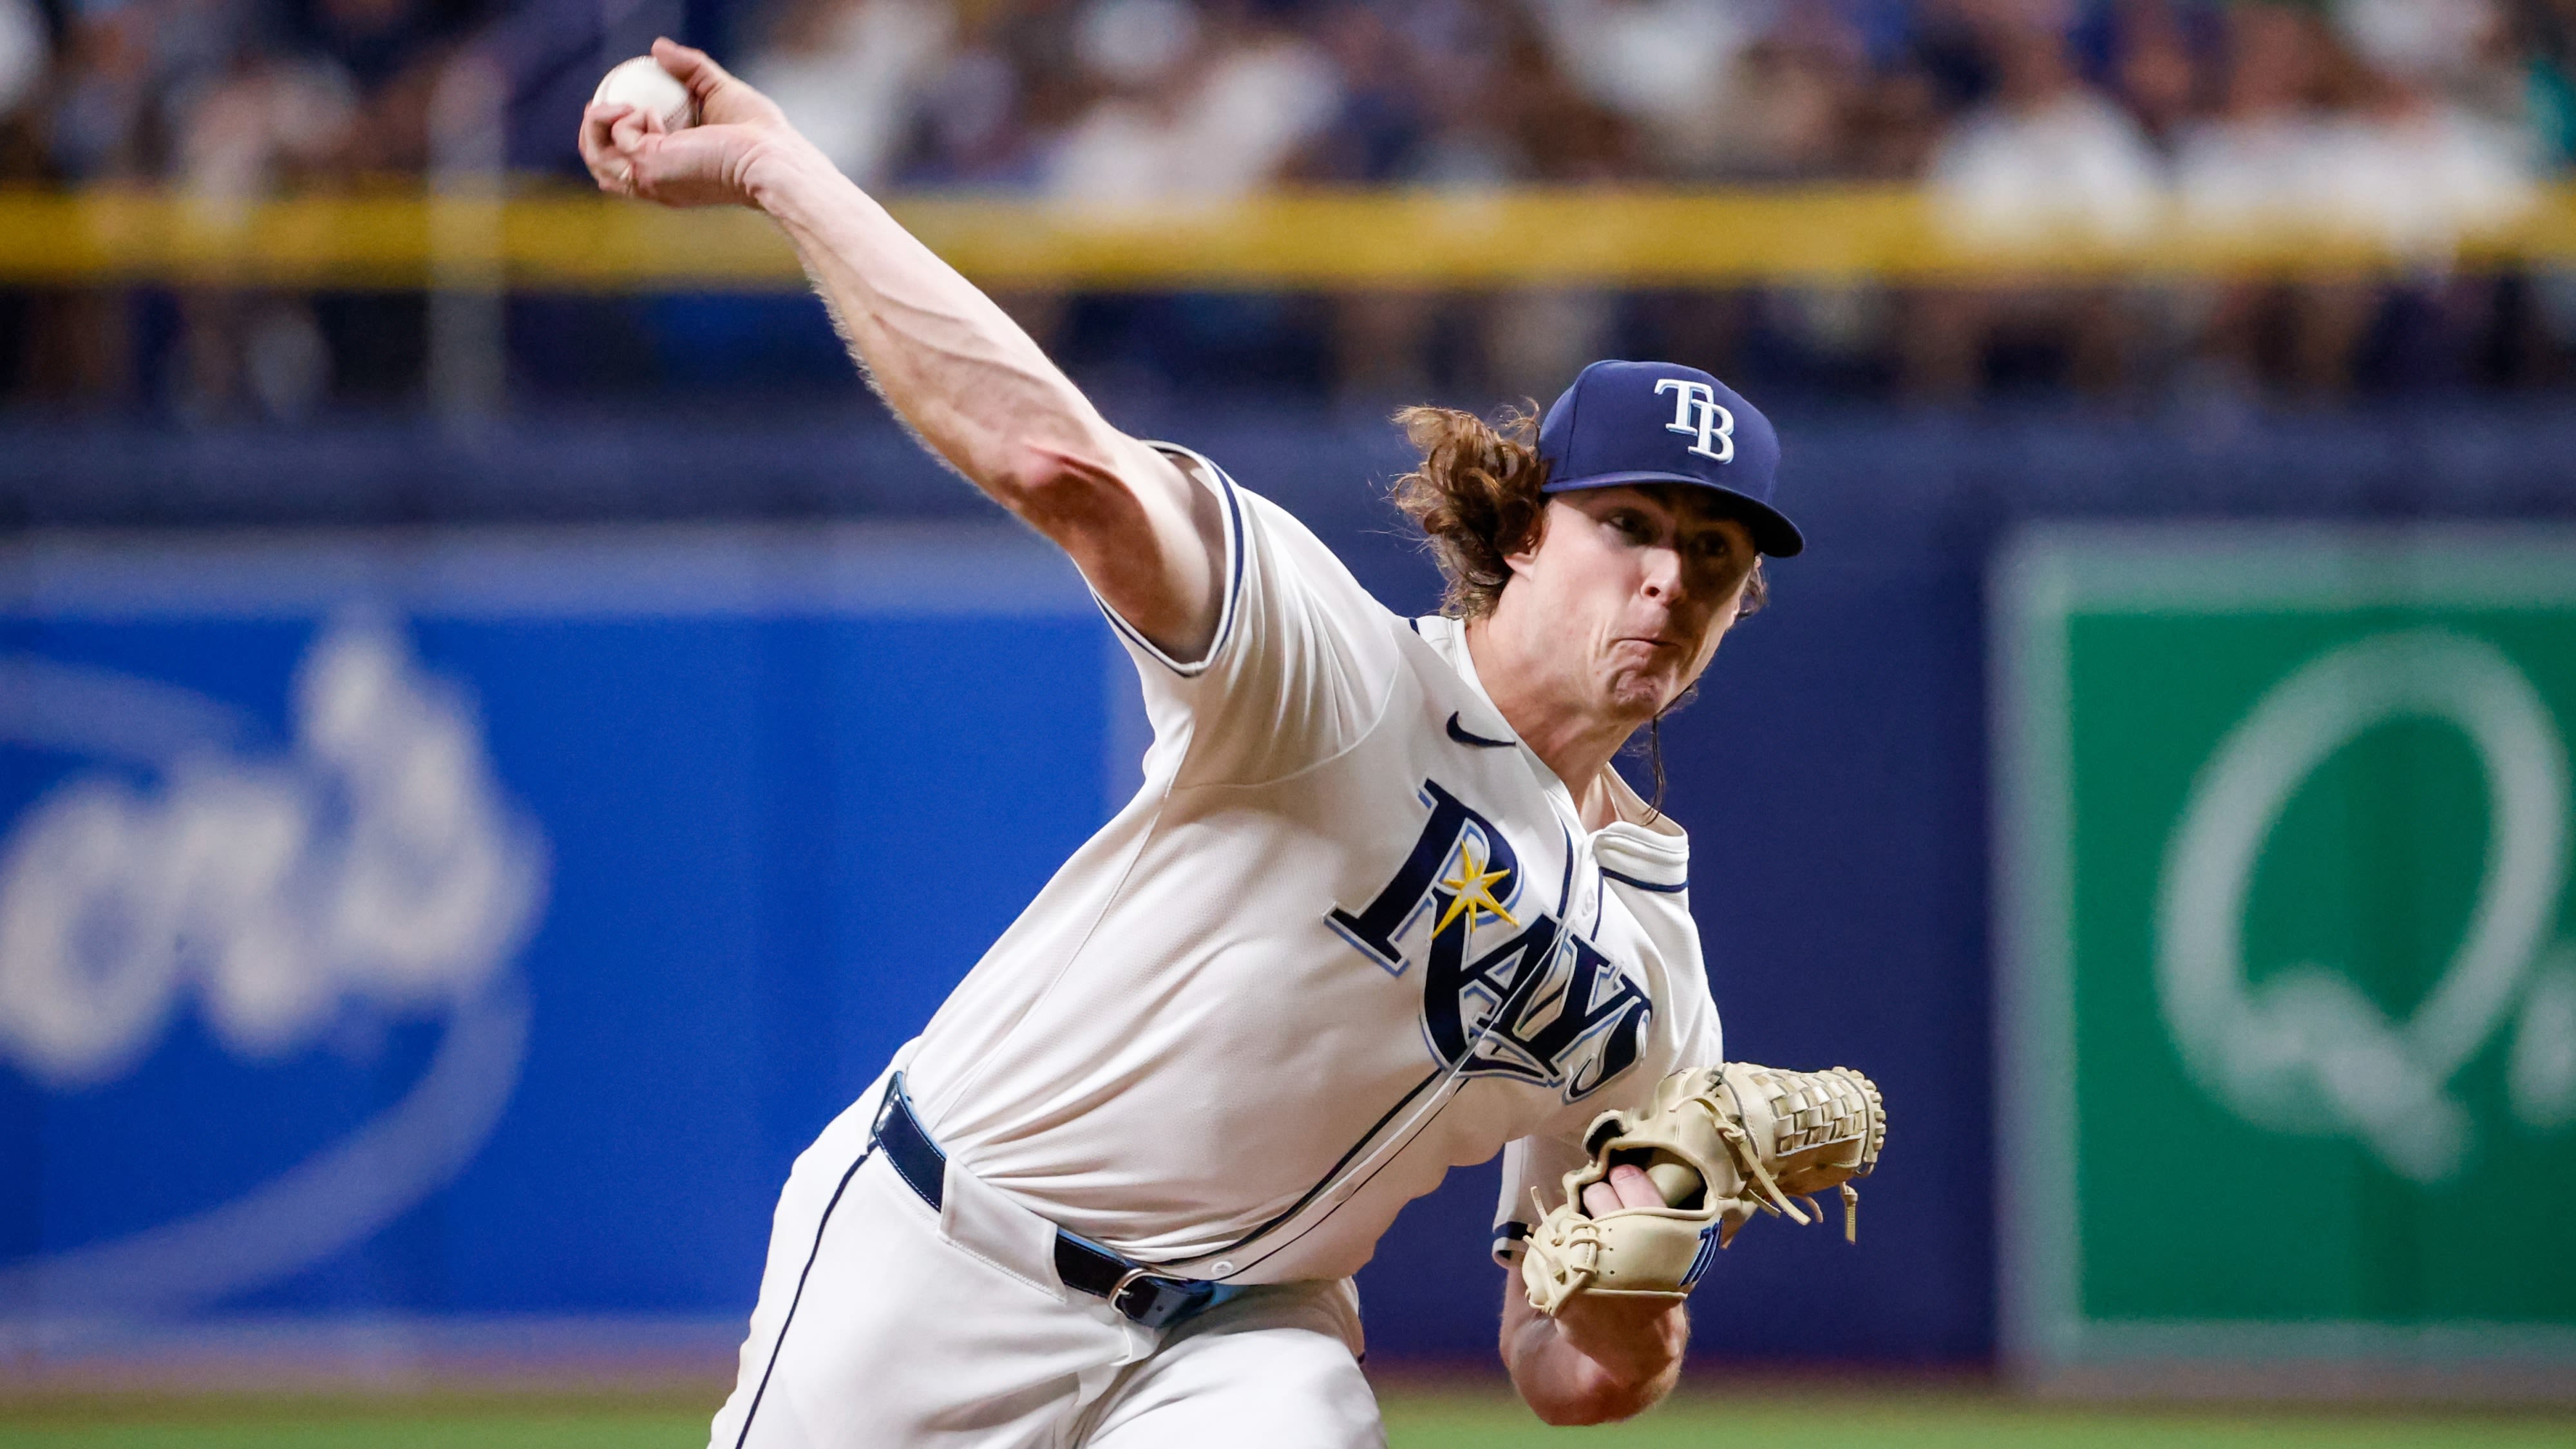 Rays put Ryan Pepiot on IL due to infection that required hospitalization